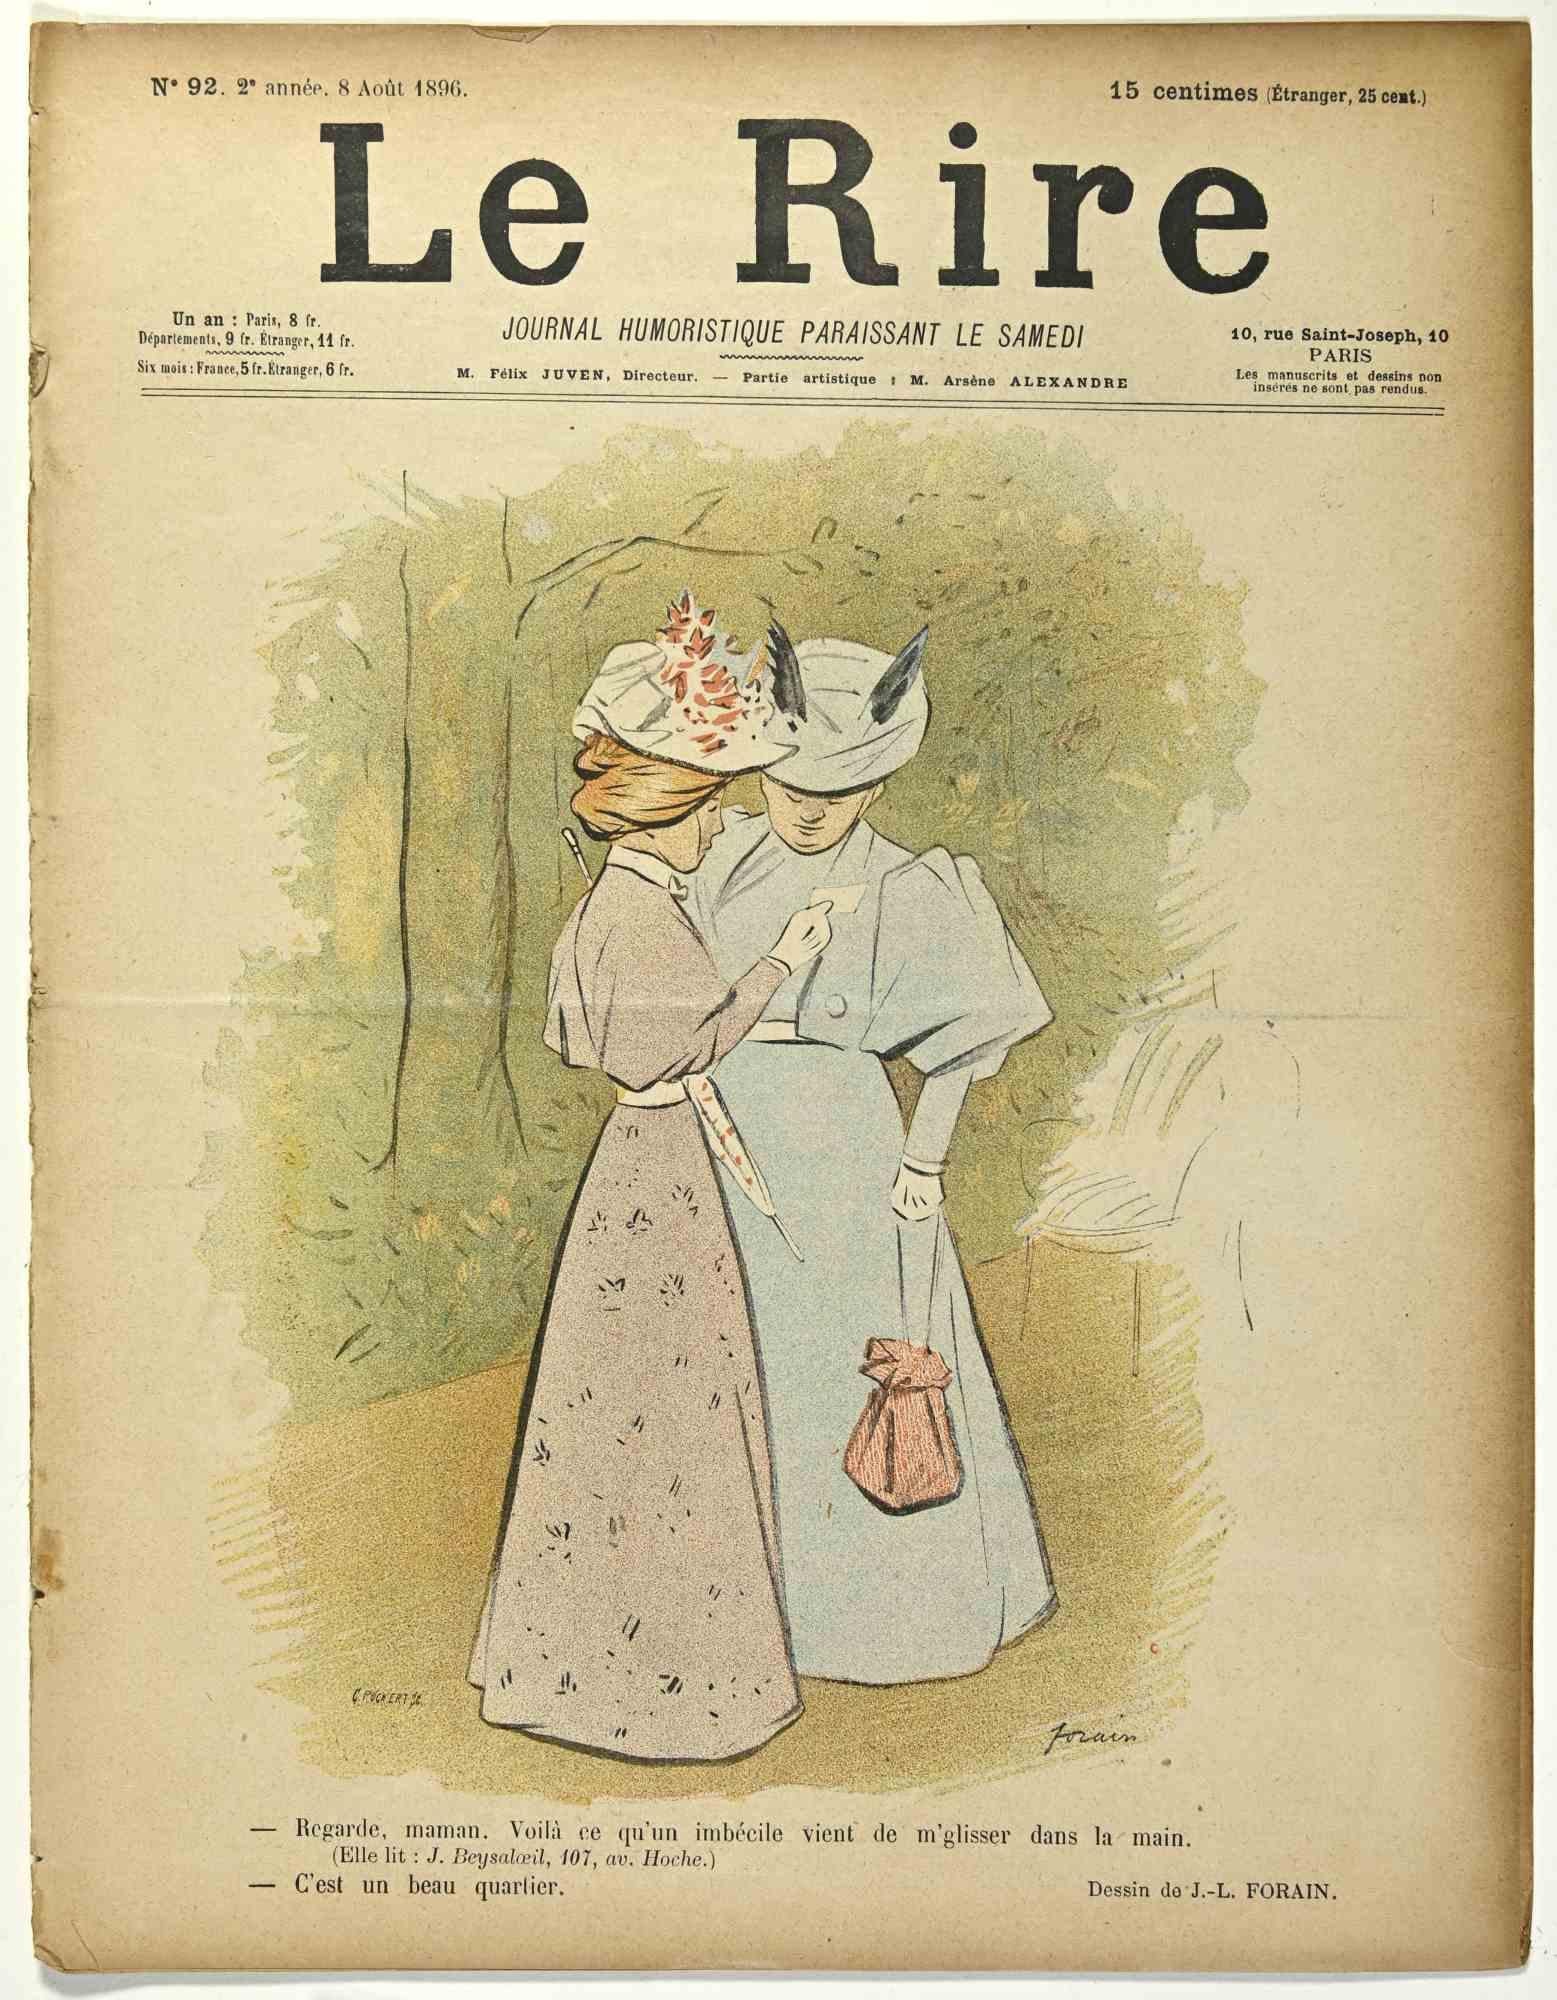 Le Rire is a Comic Magazine stamped on august 1896 drawing by  Jean Luis Forain (1852-1931).

Good condition on a yellowed paper, except some torn paper on the left margin.

Stamp signed on the lower right corner.

Jean Luis Forain (1852-1931) was a